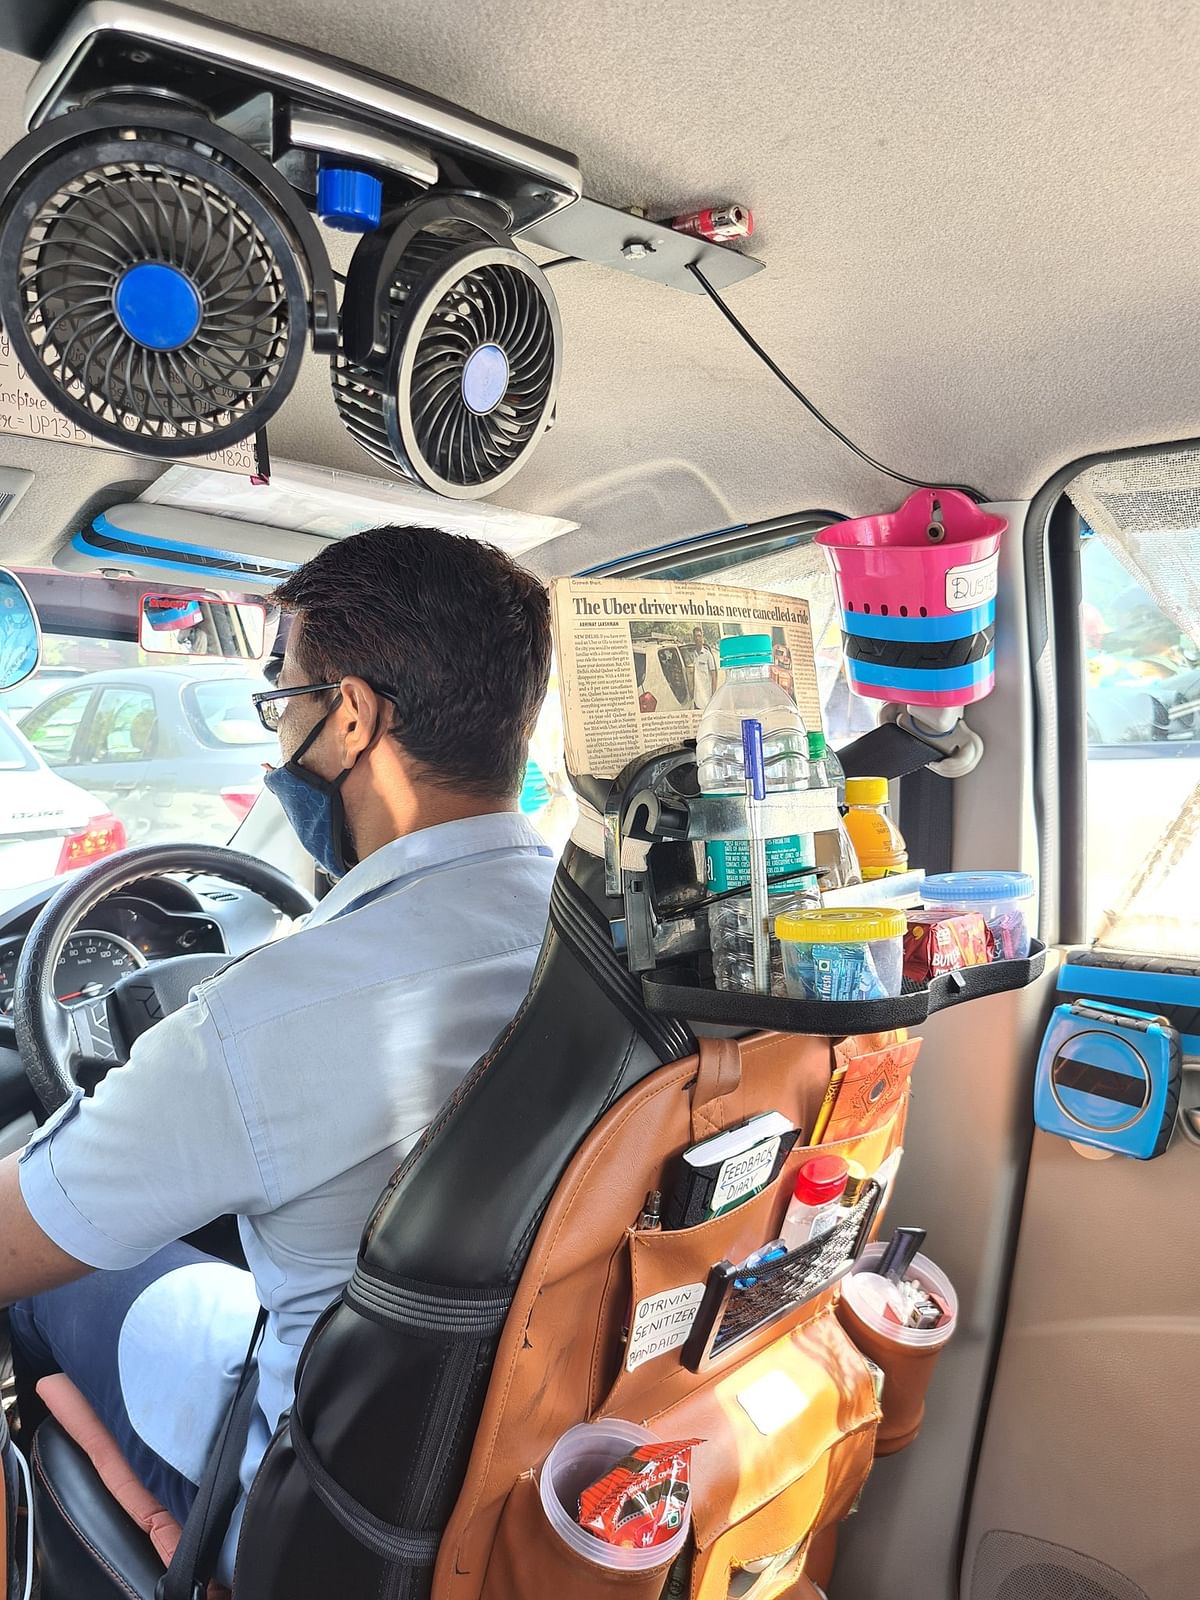 Abdul Qadeer might look like a regular cab from the outside but inside it’s a whole different world.